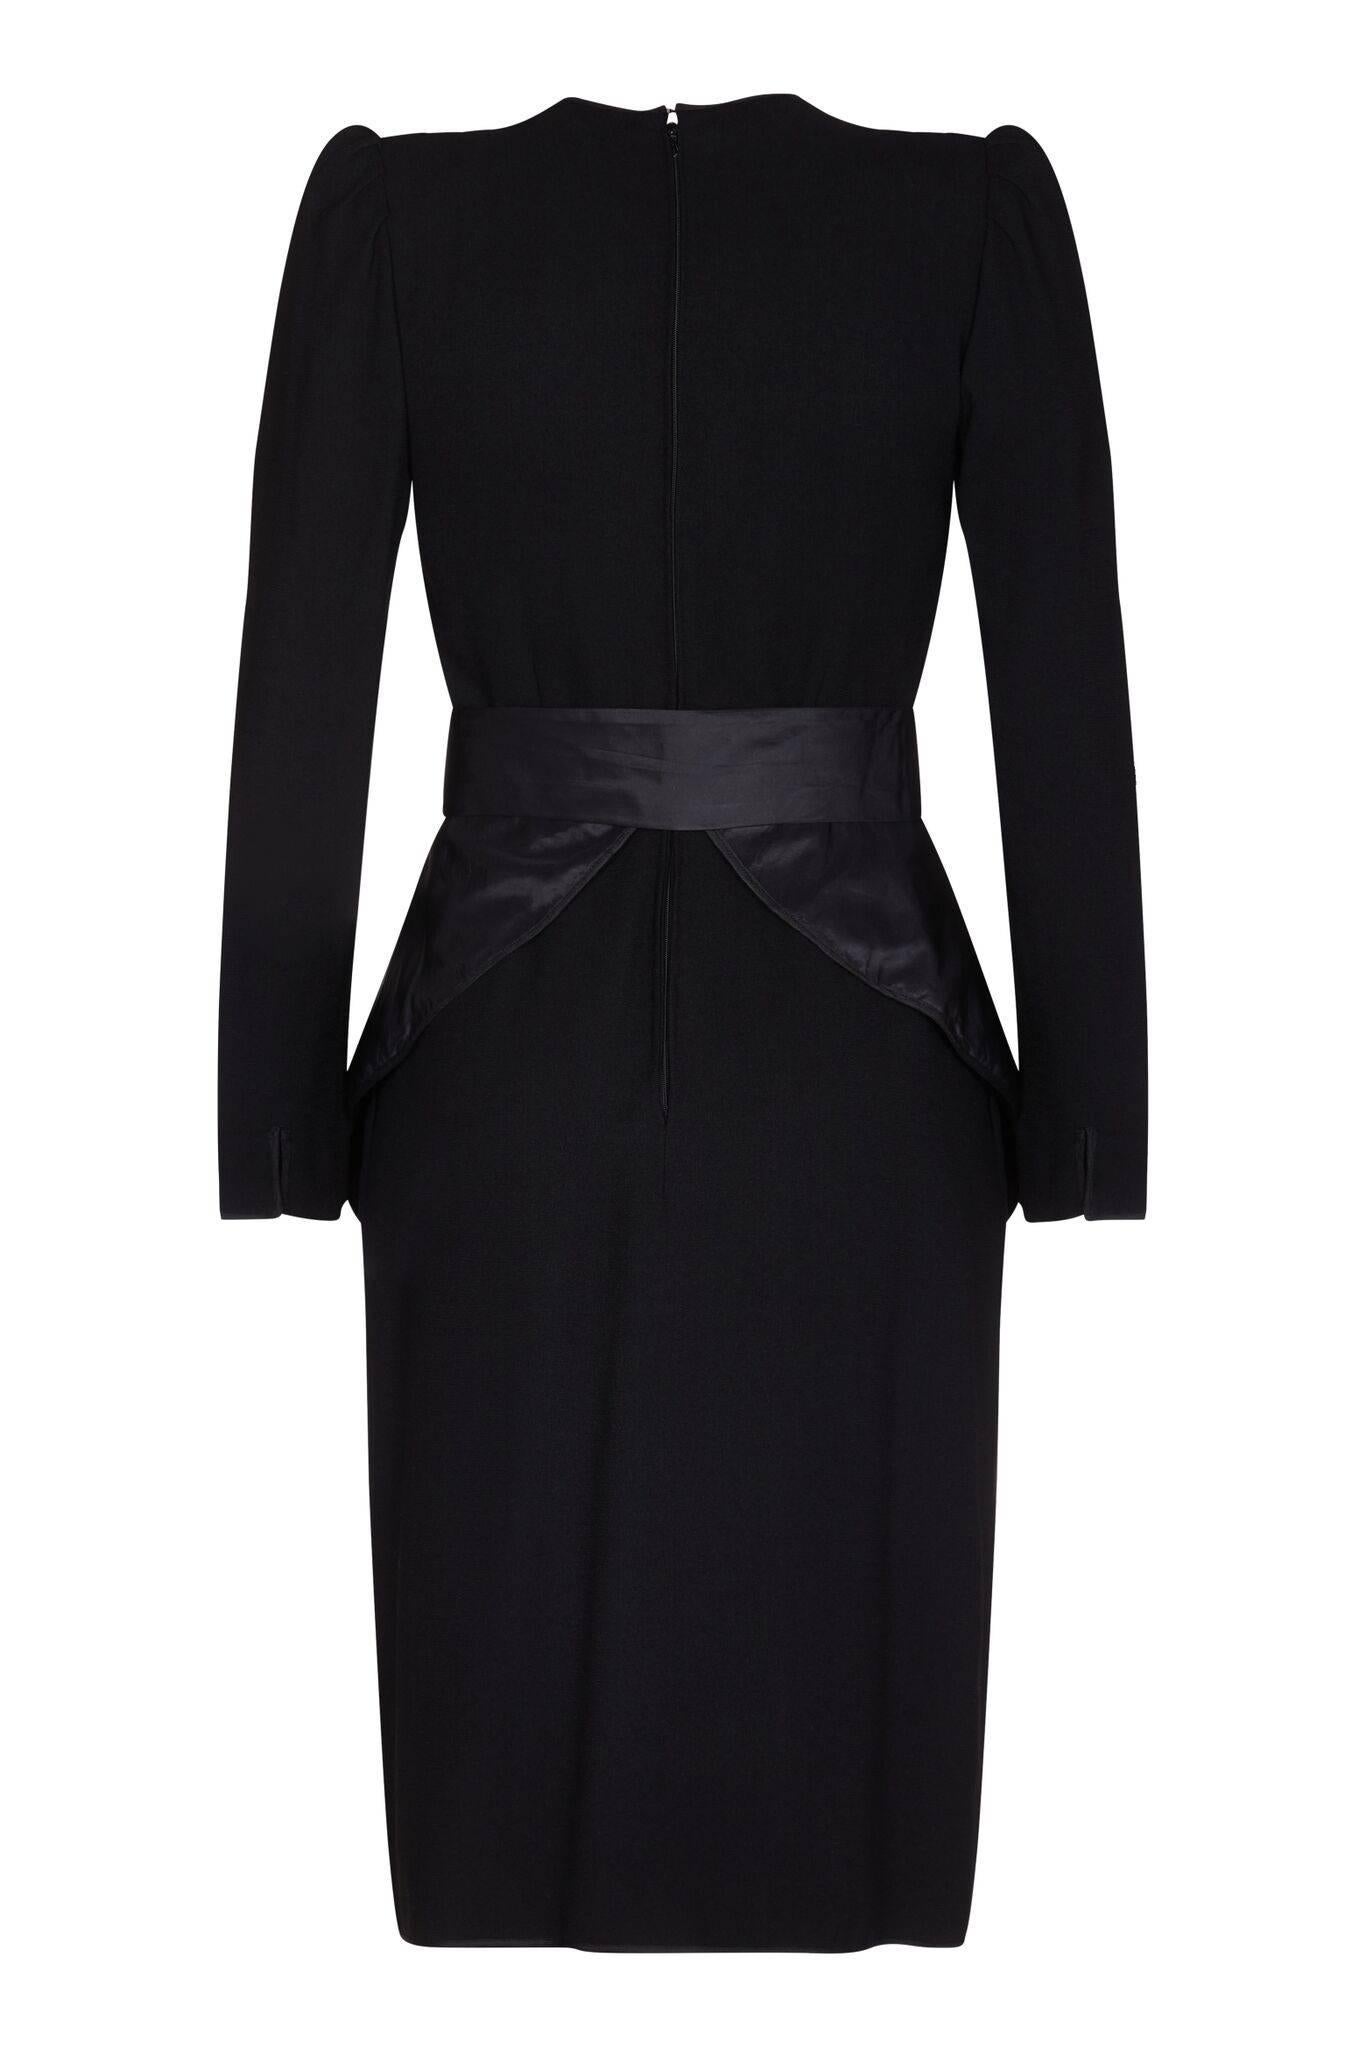 This dramatic Nina Ricci 1980s cocktail dress is a wonderful combination of feminine tailoring and statement design features. The dress is silk lined with a fine black wool crepe overlay and a silk taffetta peplum. The peplum is the key feature of